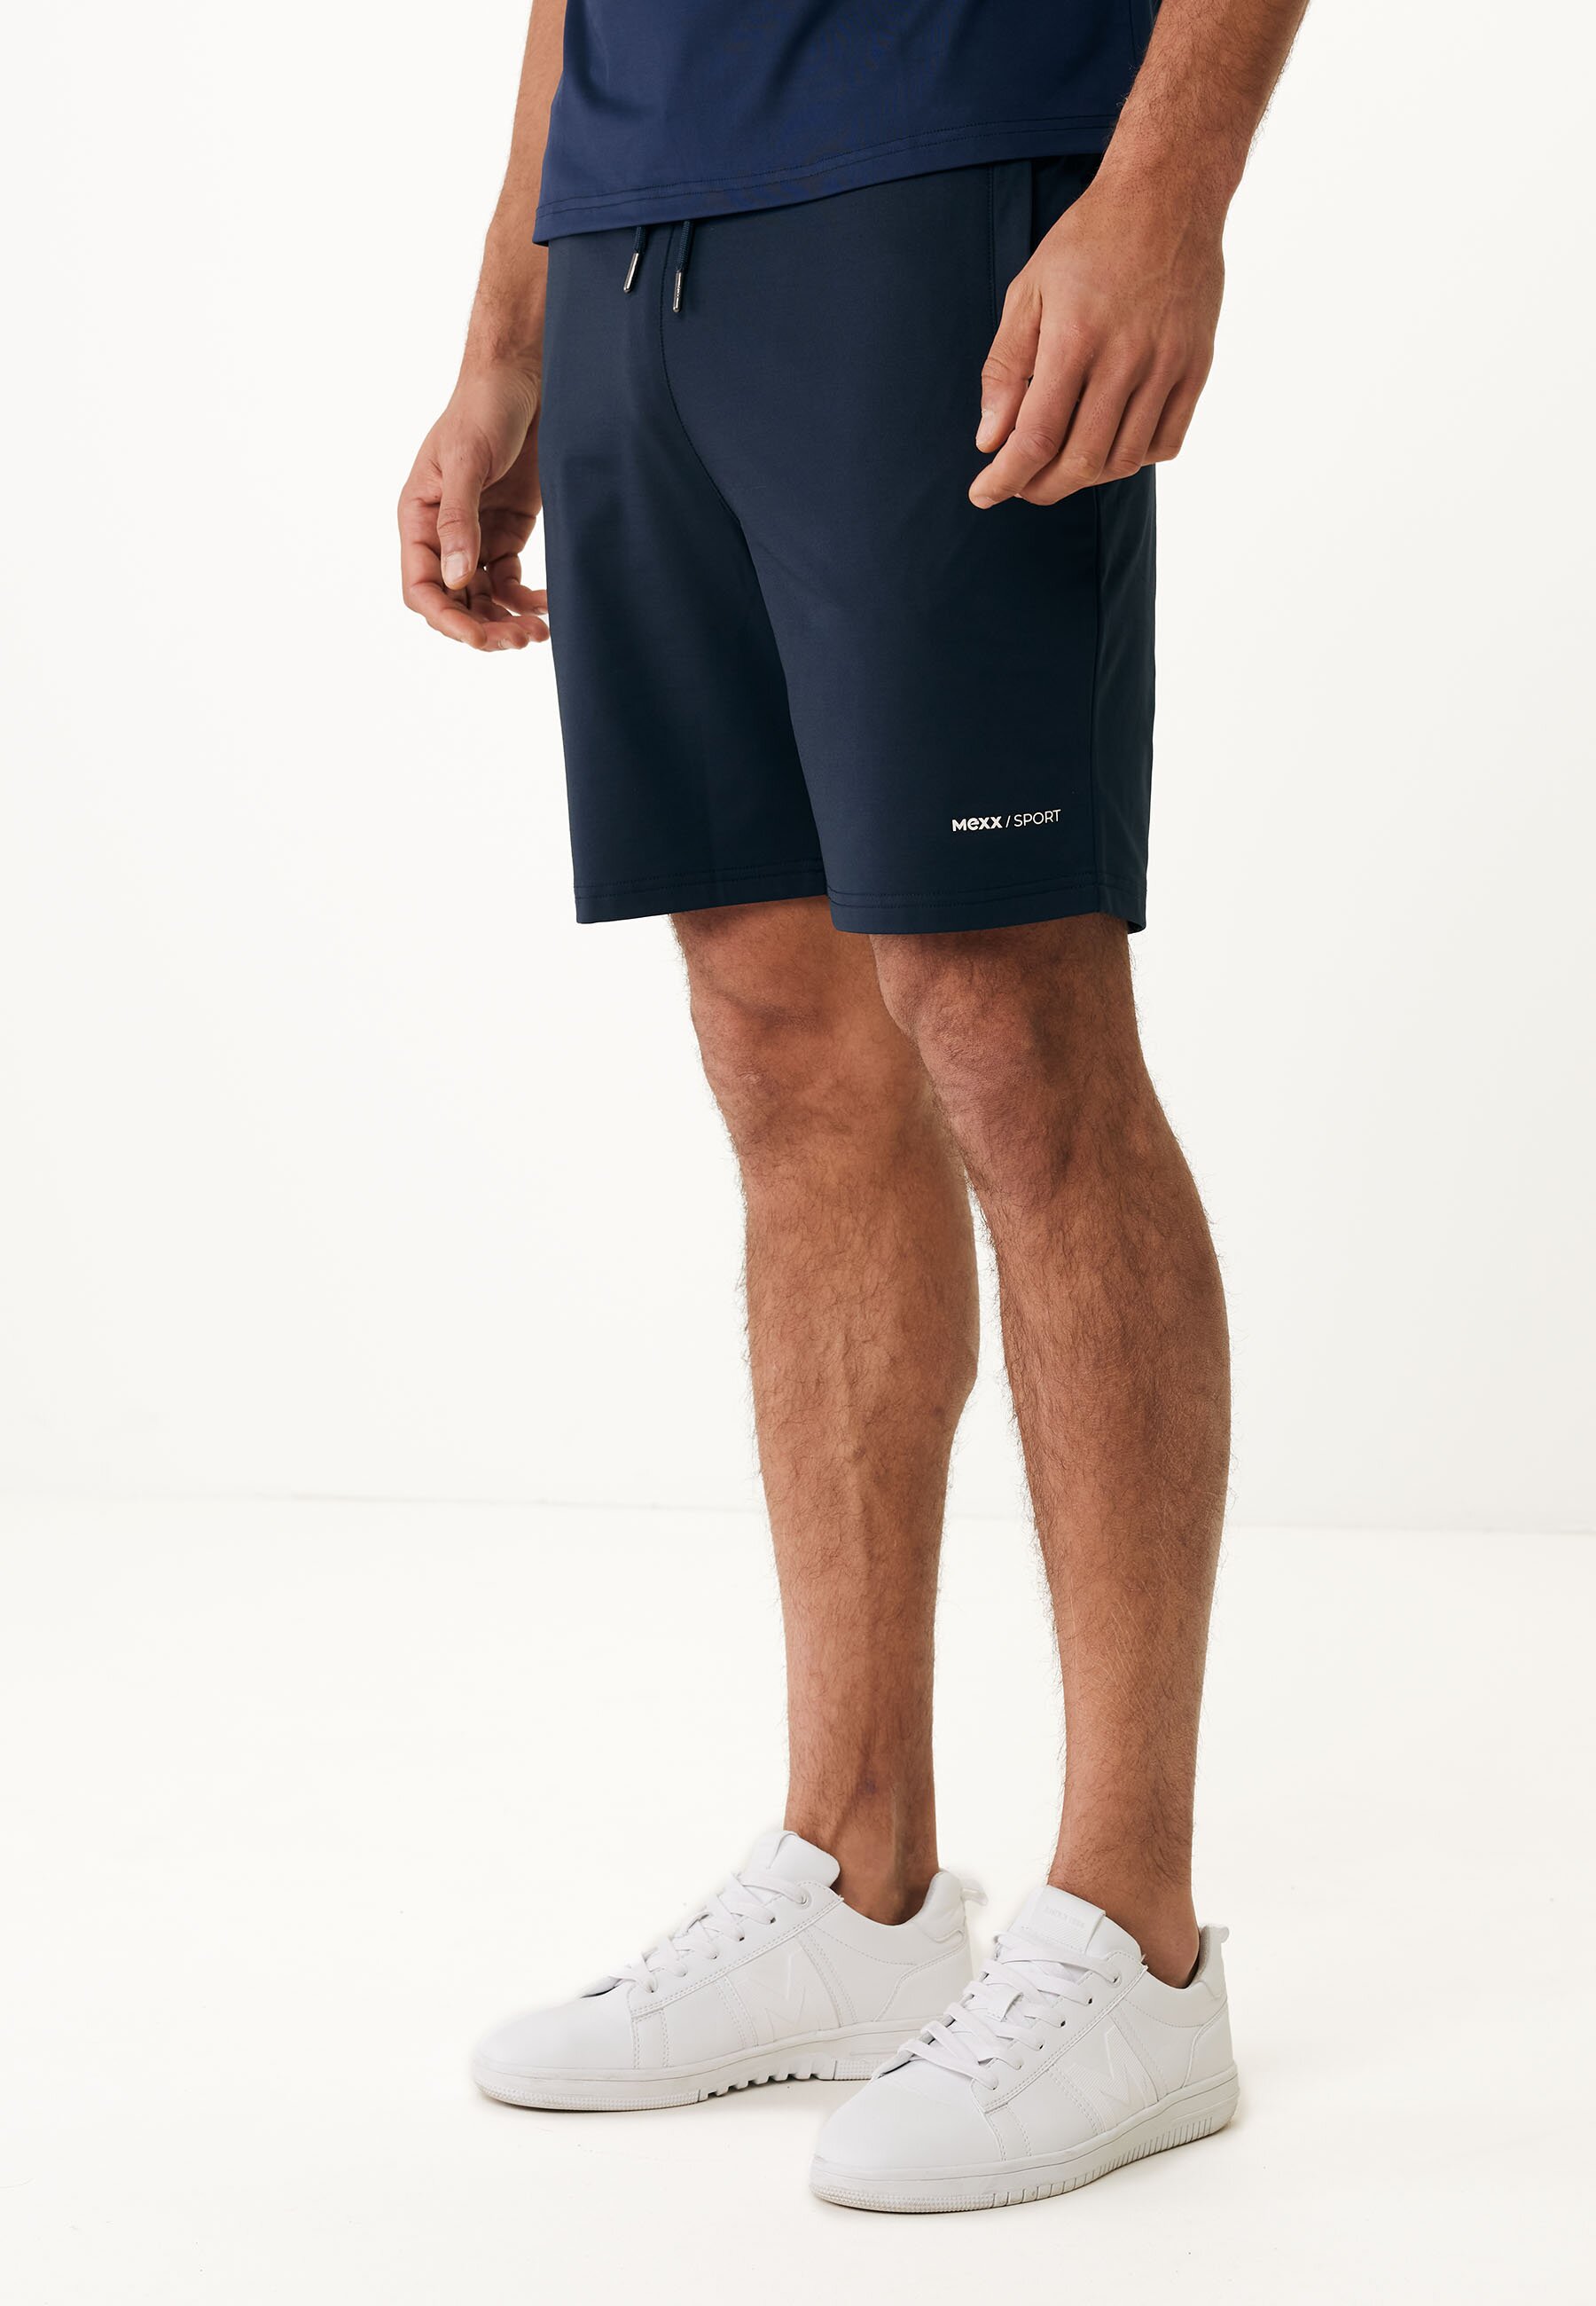 Mexx Activewear Shorts With Contrast Back Panel Mannen - Navy - Maat M